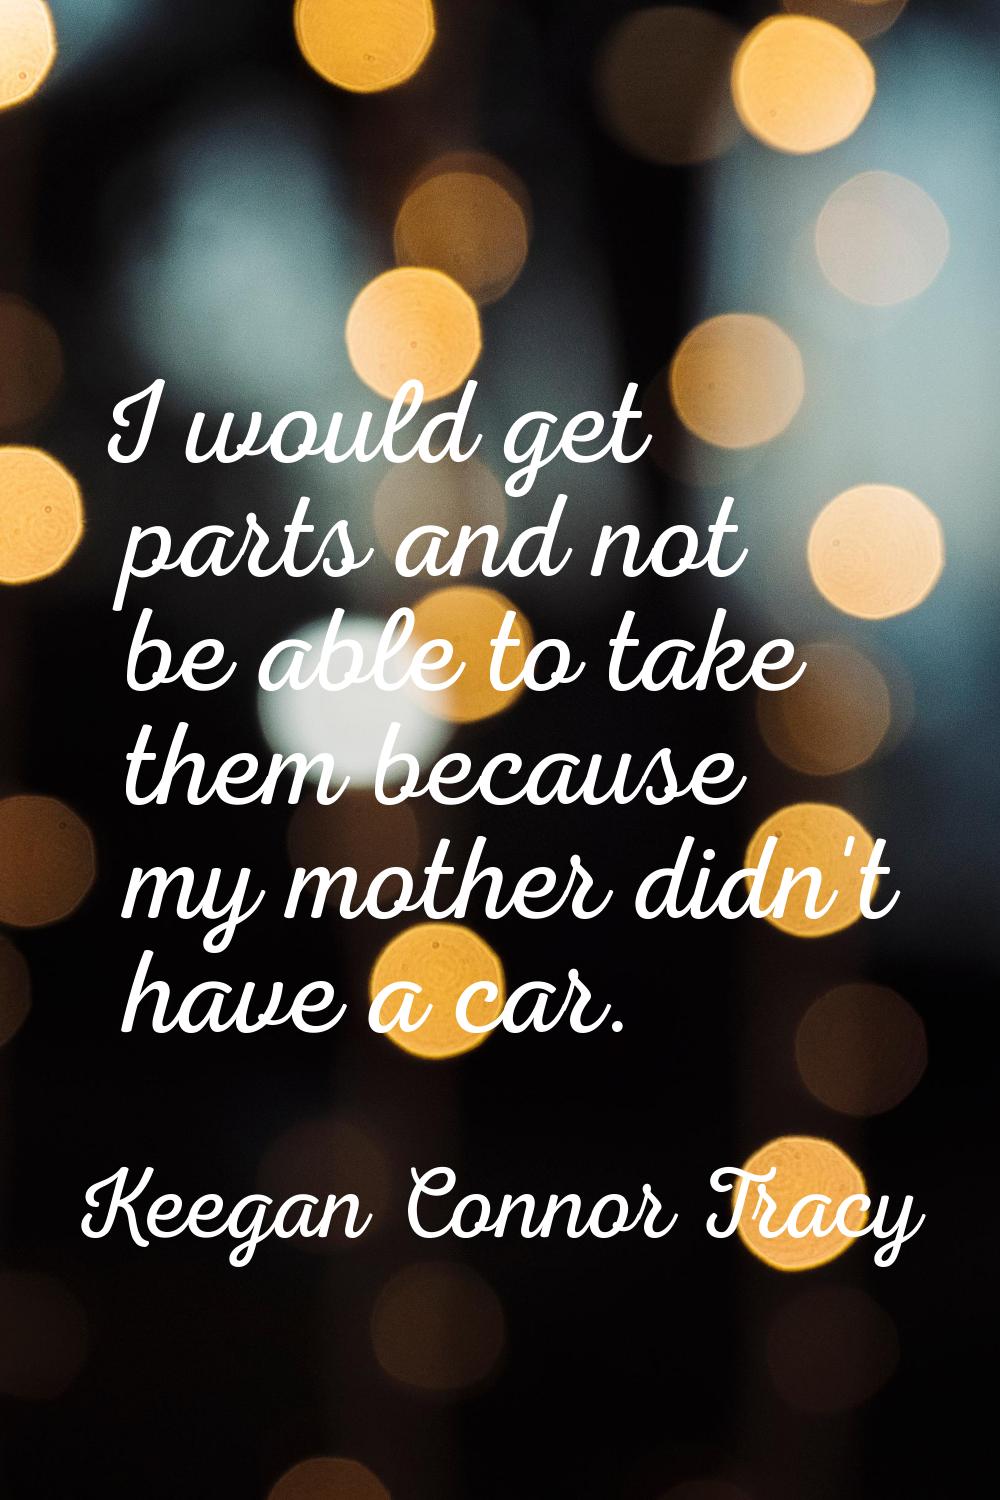 I would get parts and not be able to take them because my mother didn't have a car.